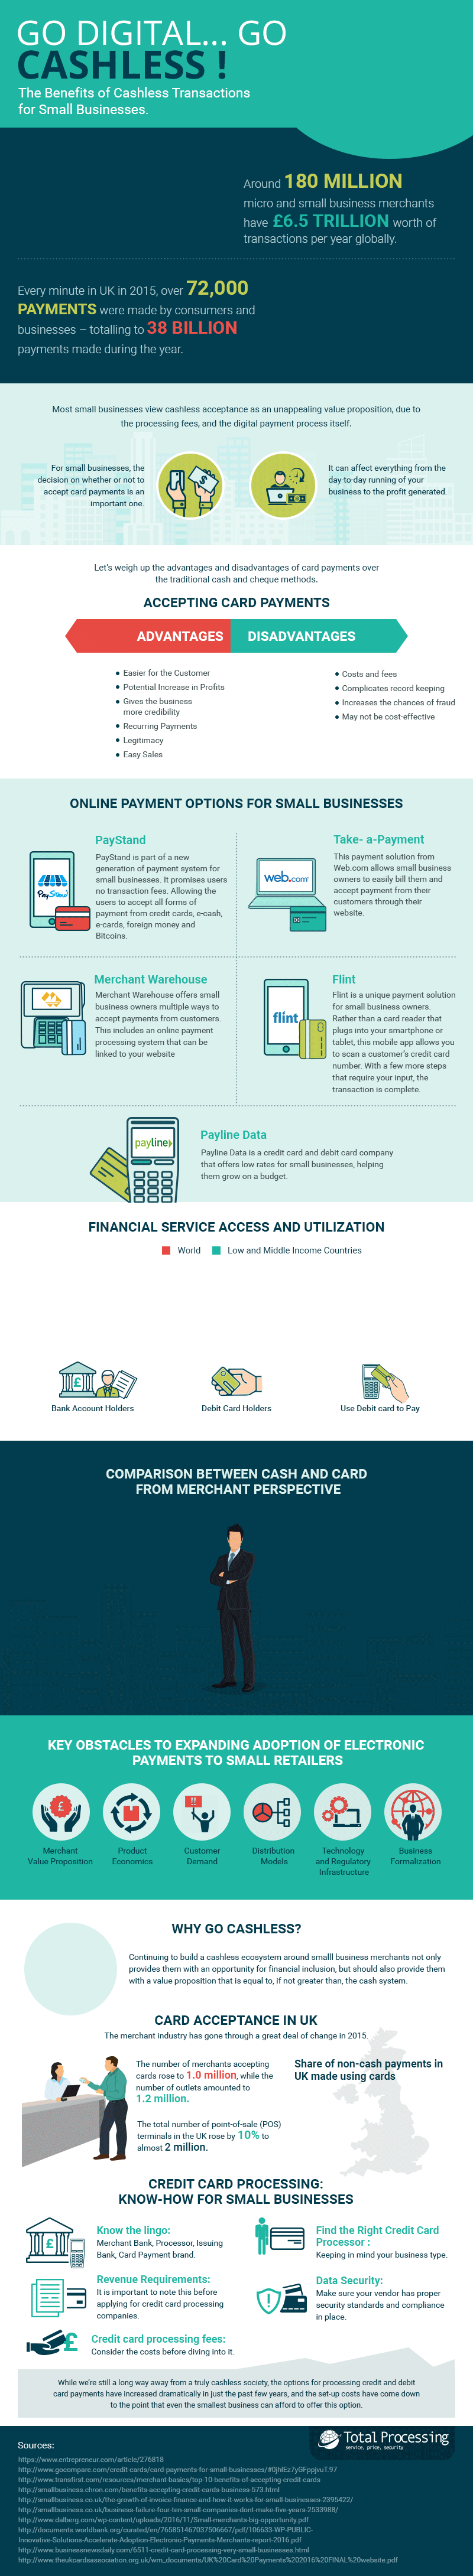 Small Business Accepting Payments